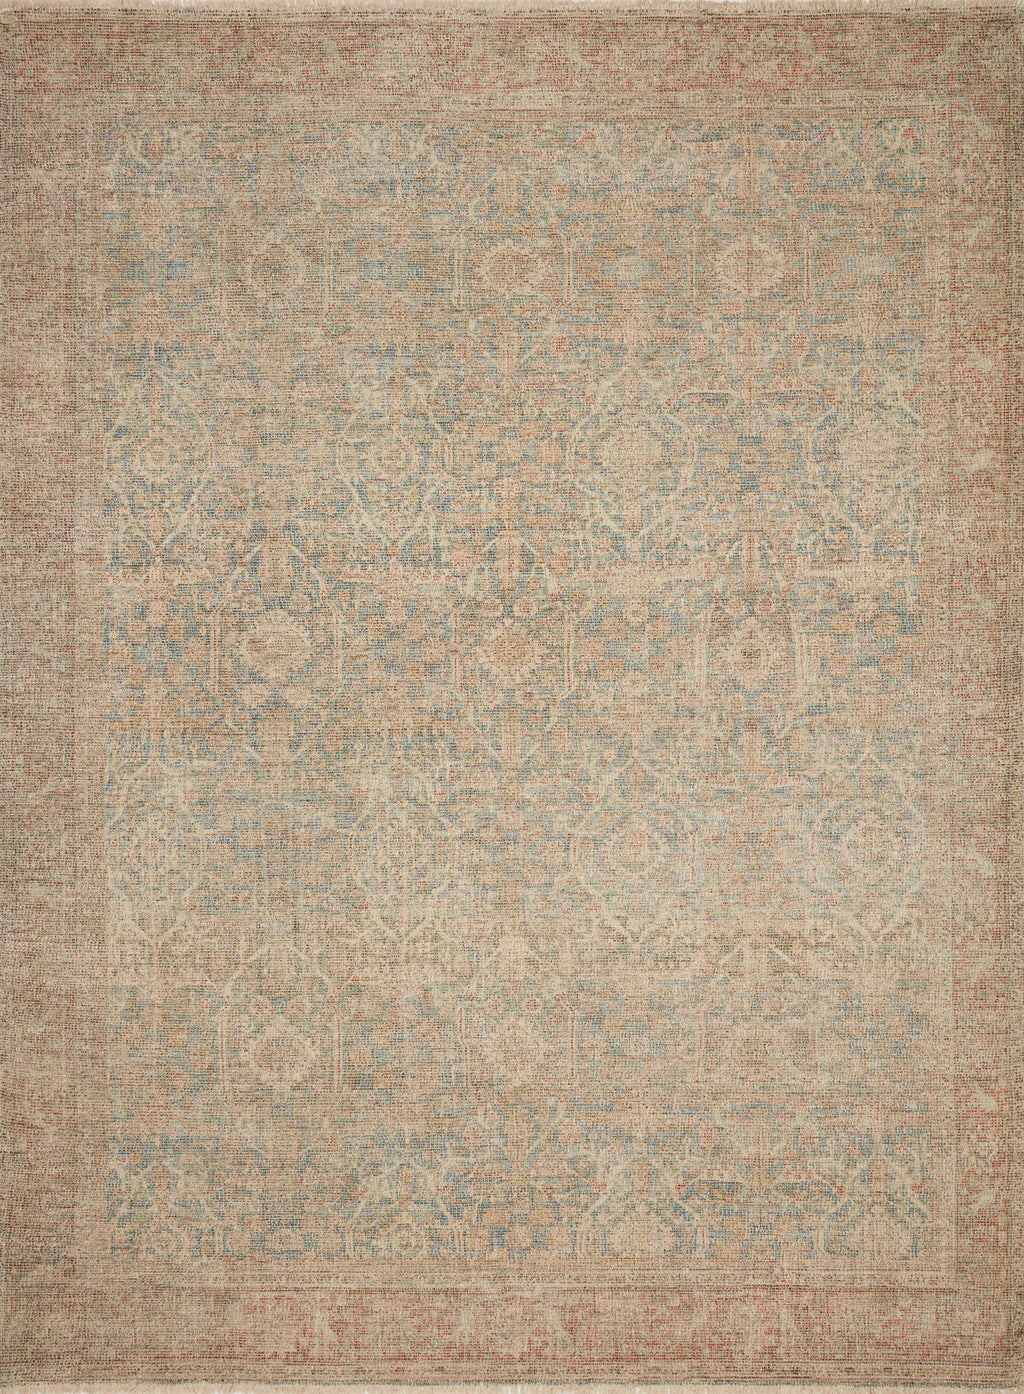 PRIYA Collection Wool/Viscose Rug  in  Denim / Rust Blue Accent Hand-Woven Wool/Viscose